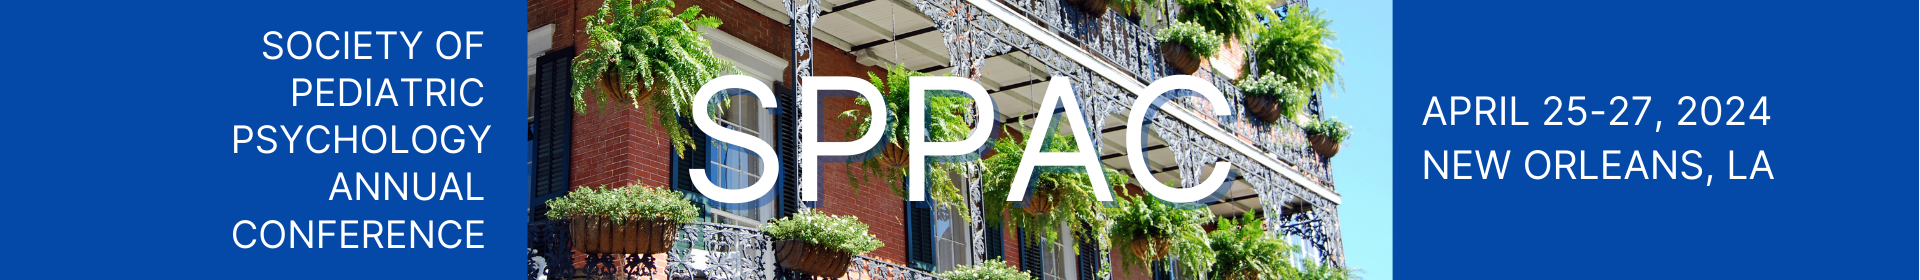 Society of Pediatric Psychology Annual Conference | April 25-27, 2024, New Orleans, LA